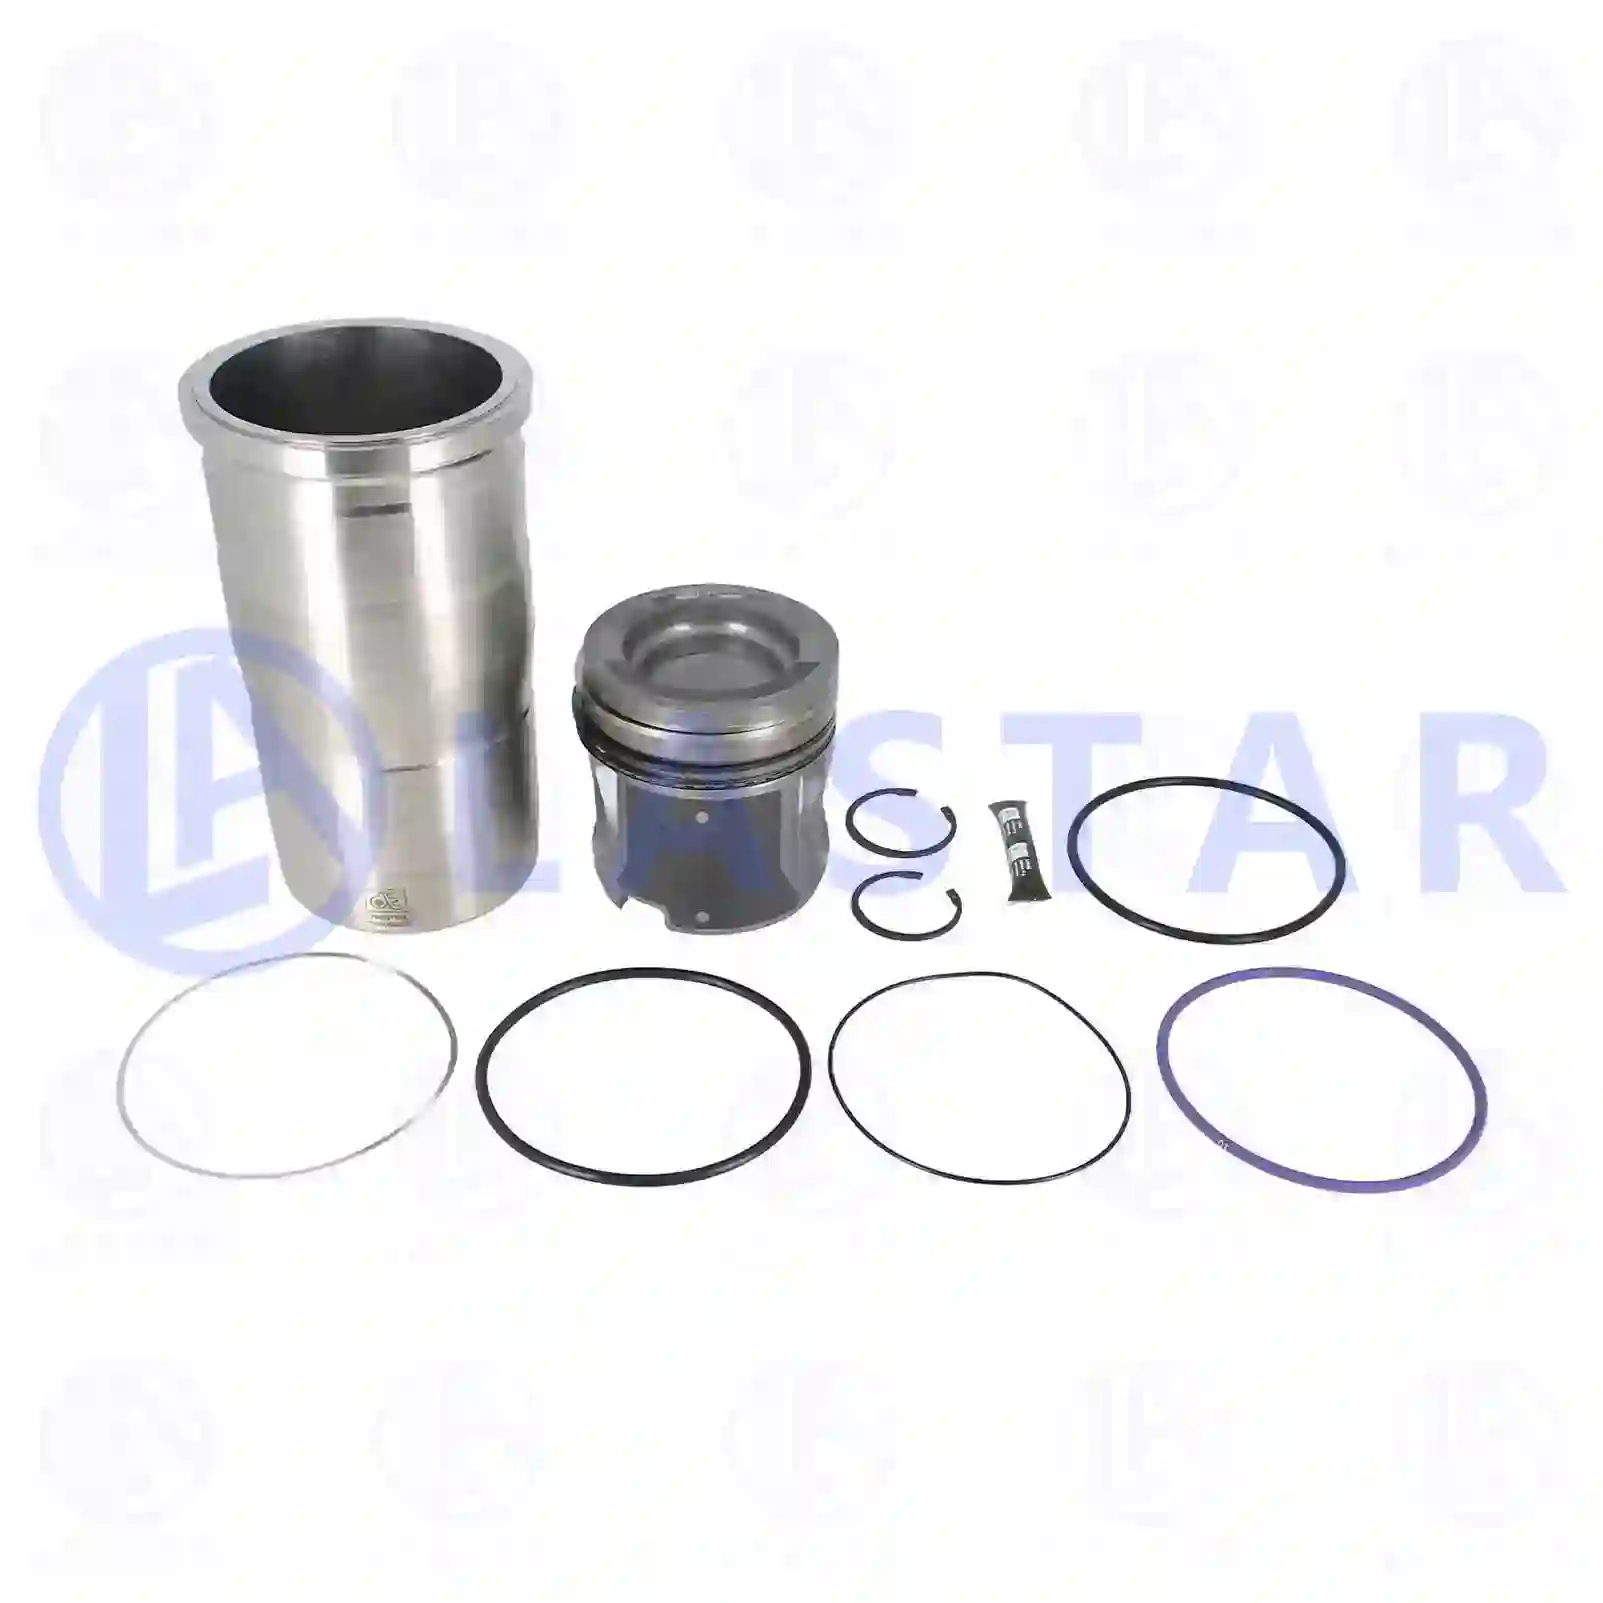 Piston with liner, 77704010, 20509929, 20515376, 276933, 276939, 85103626, ZG01904-0008 ||  77704010 Lastar Spare Part | Truck Spare Parts, Auotomotive Spare Parts Piston with liner, 77704010, 20509929, 20515376, 276933, 276939, 85103626, ZG01904-0008 ||  77704010 Lastar Spare Part | Truck Spare Parts, Auotomotive Spare Parts